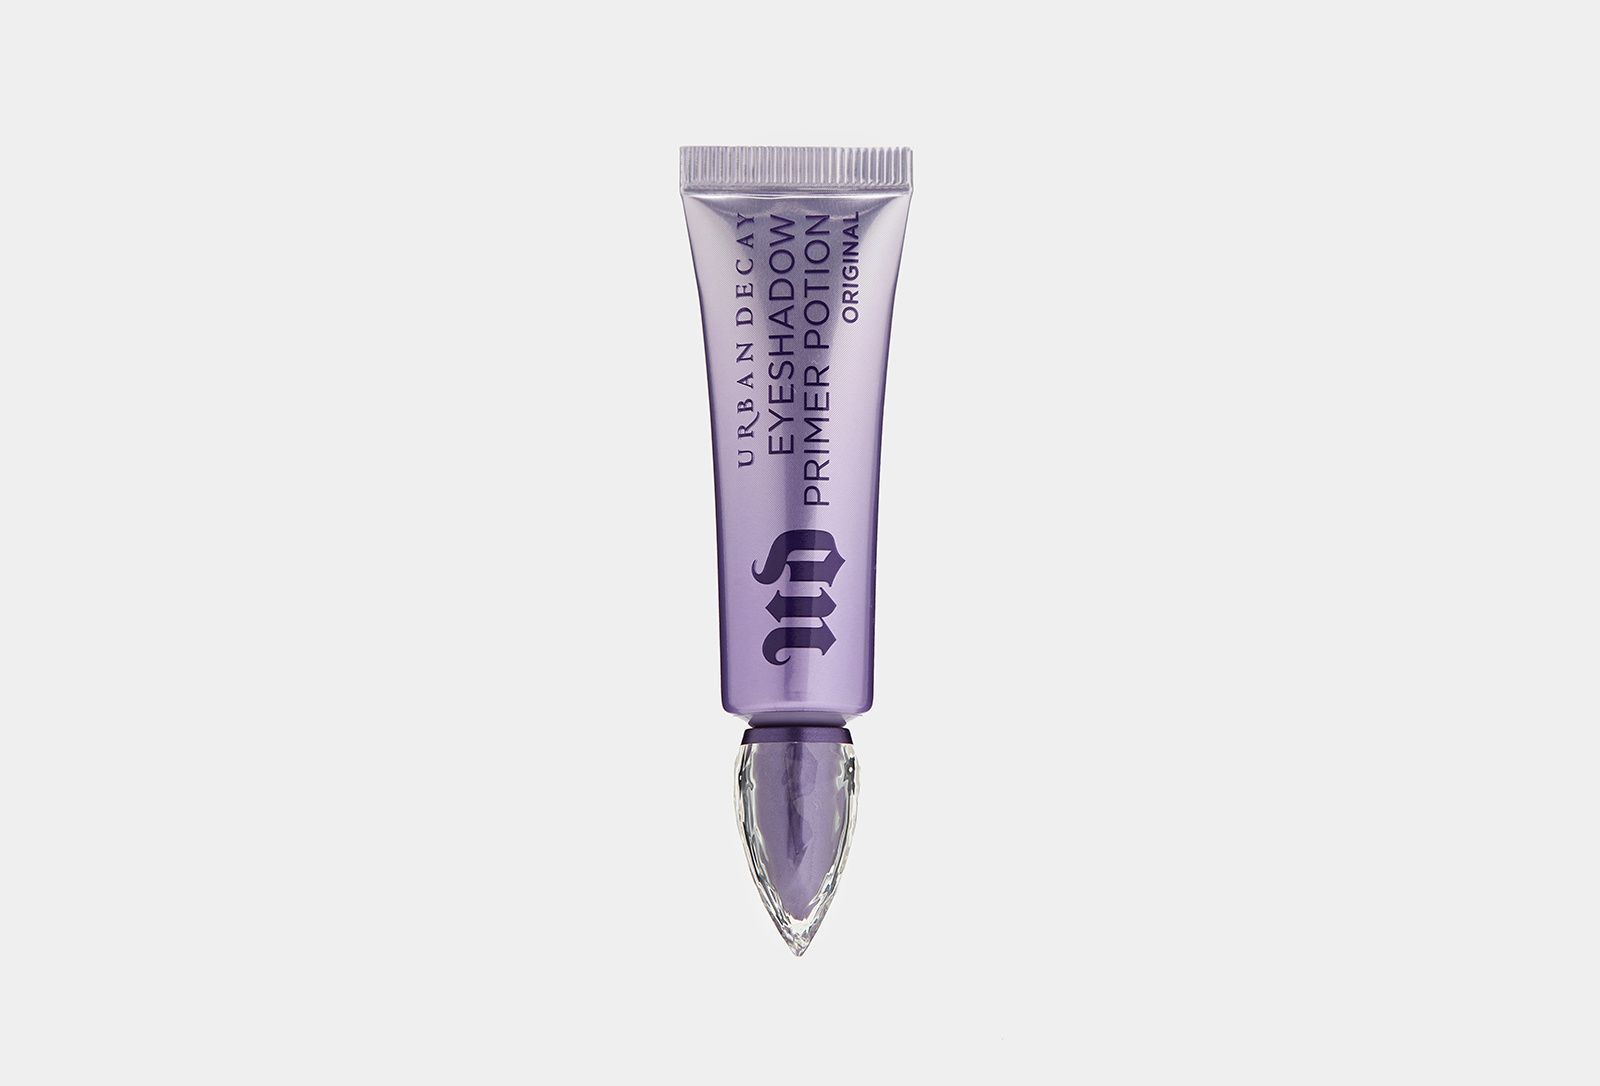 Best Urban Decay Eyeshadow Primer for Long-Lasting Looks: The Sin Potion